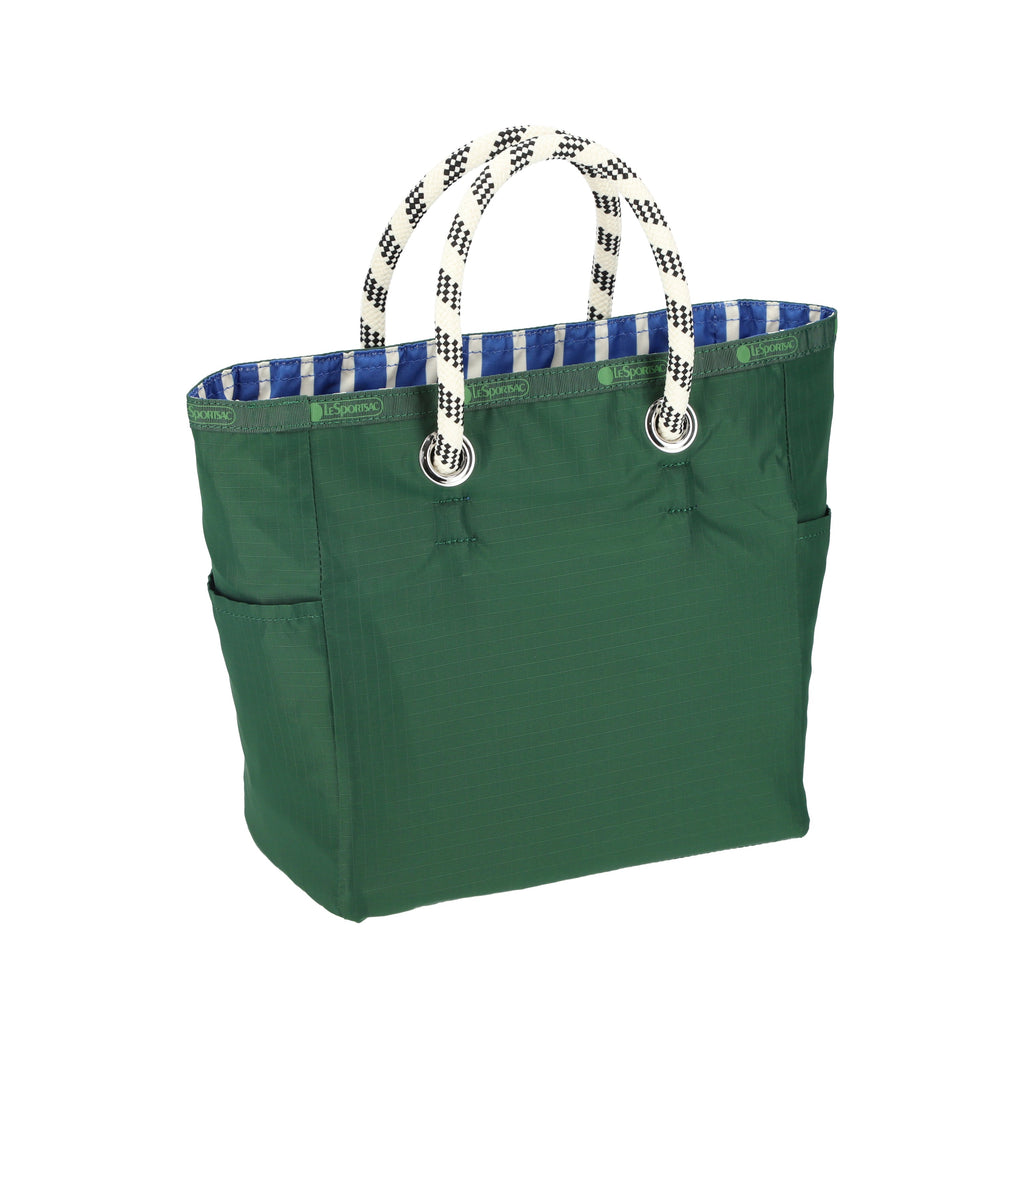 Lesportsac Large Two-Way Tote - Birch/Olive